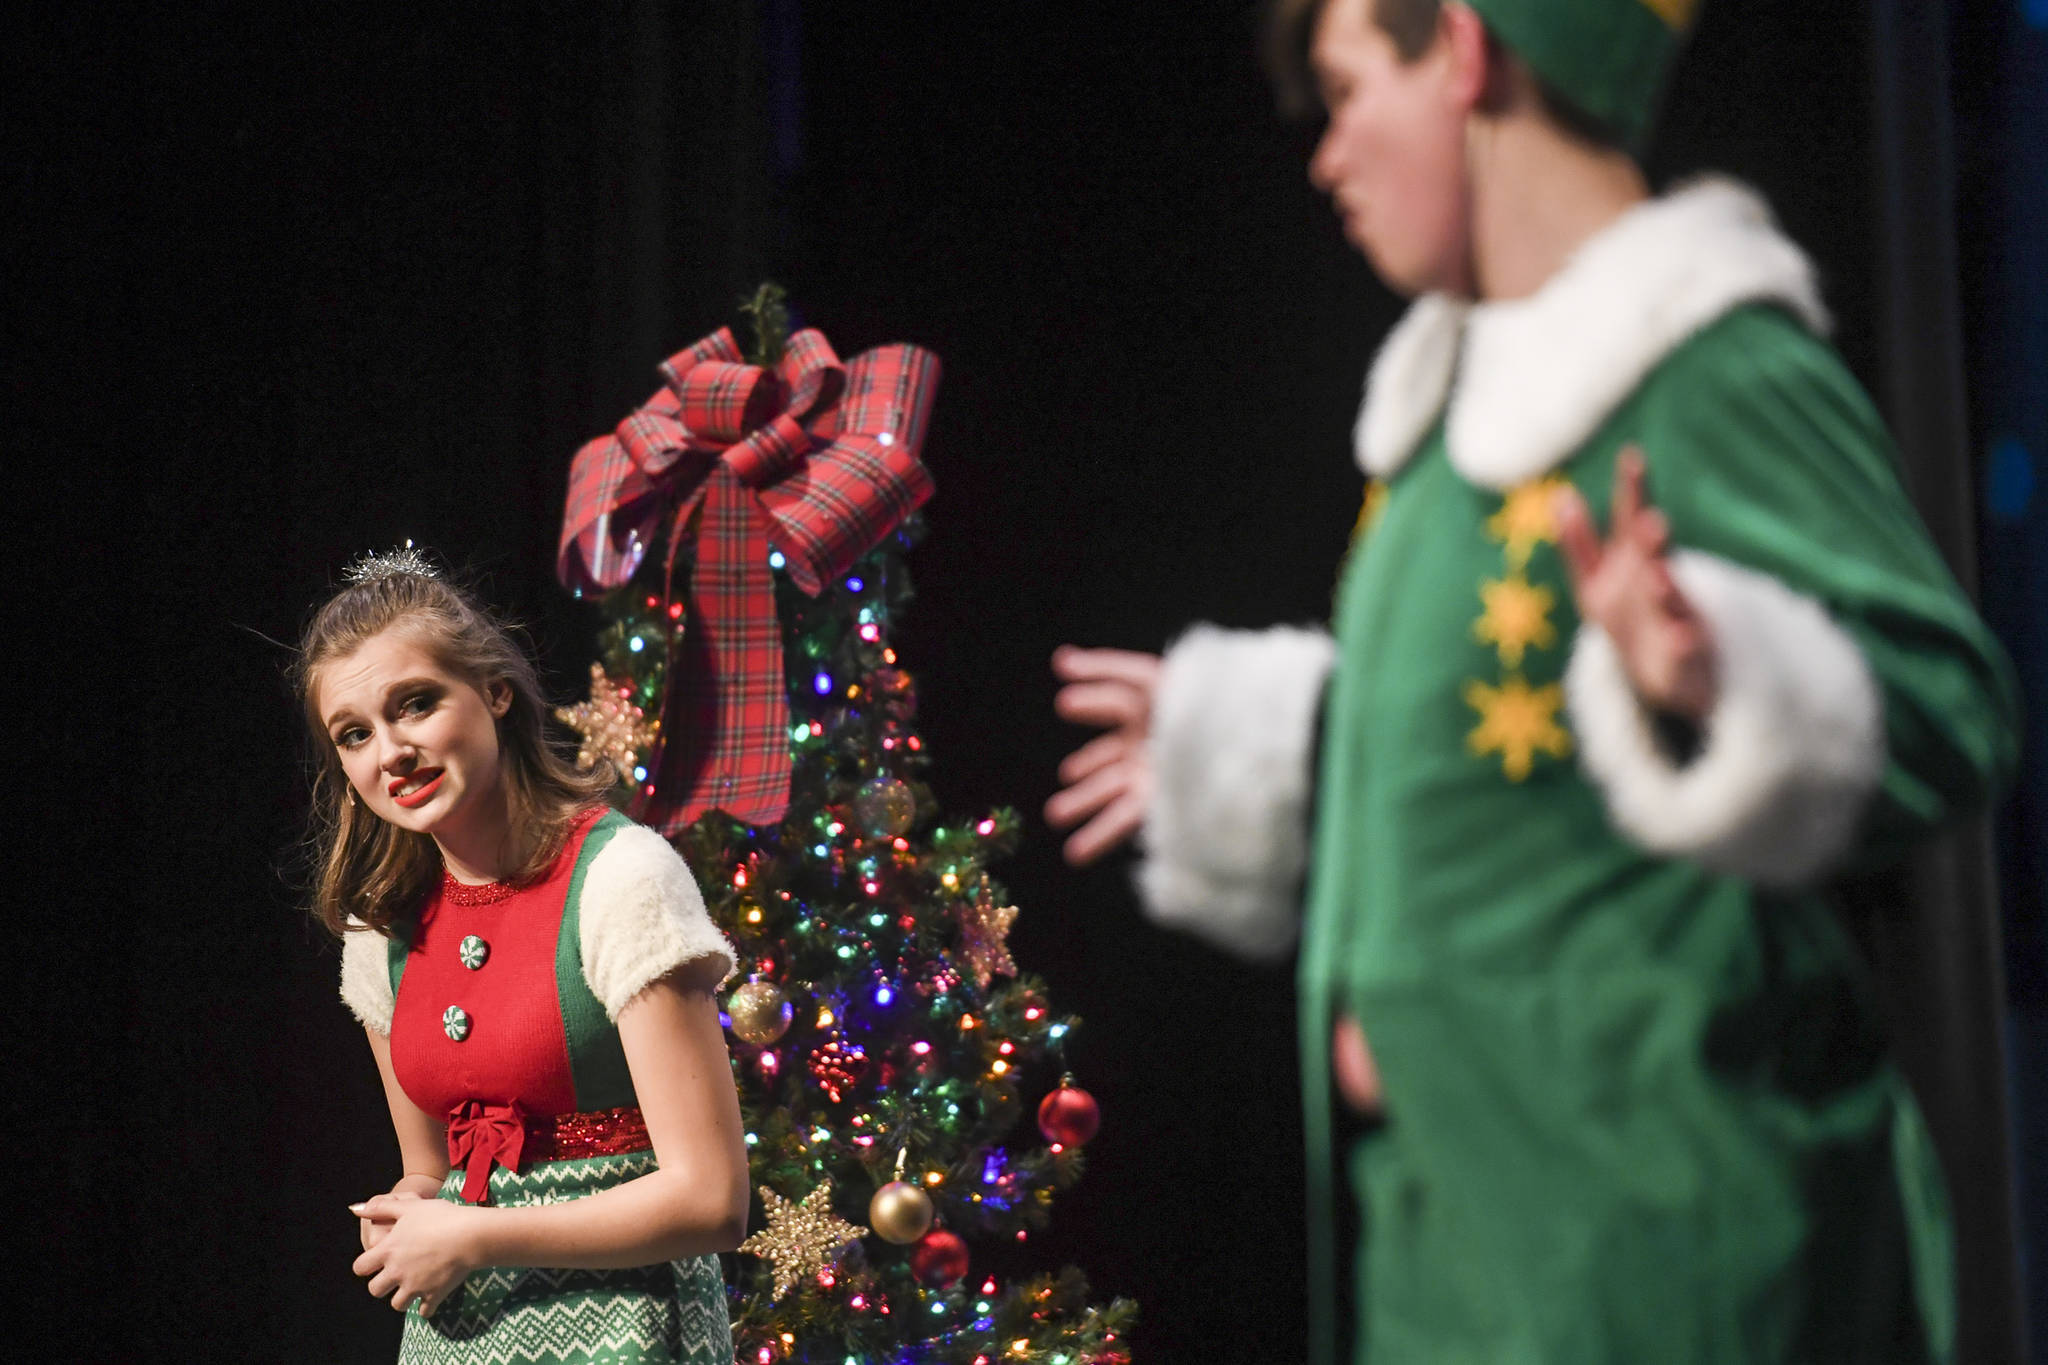 Jovie, played by Kayla Kohlhase, left, meets Buddy the Elf, played by Toby Russell, during rehearsal of “Elf, the Musicial” at Juneau-Douglas High School: Yadaa.at Kalé on Friday, Dec. 13, 2019. (Michael Penn | Juneau Empire)